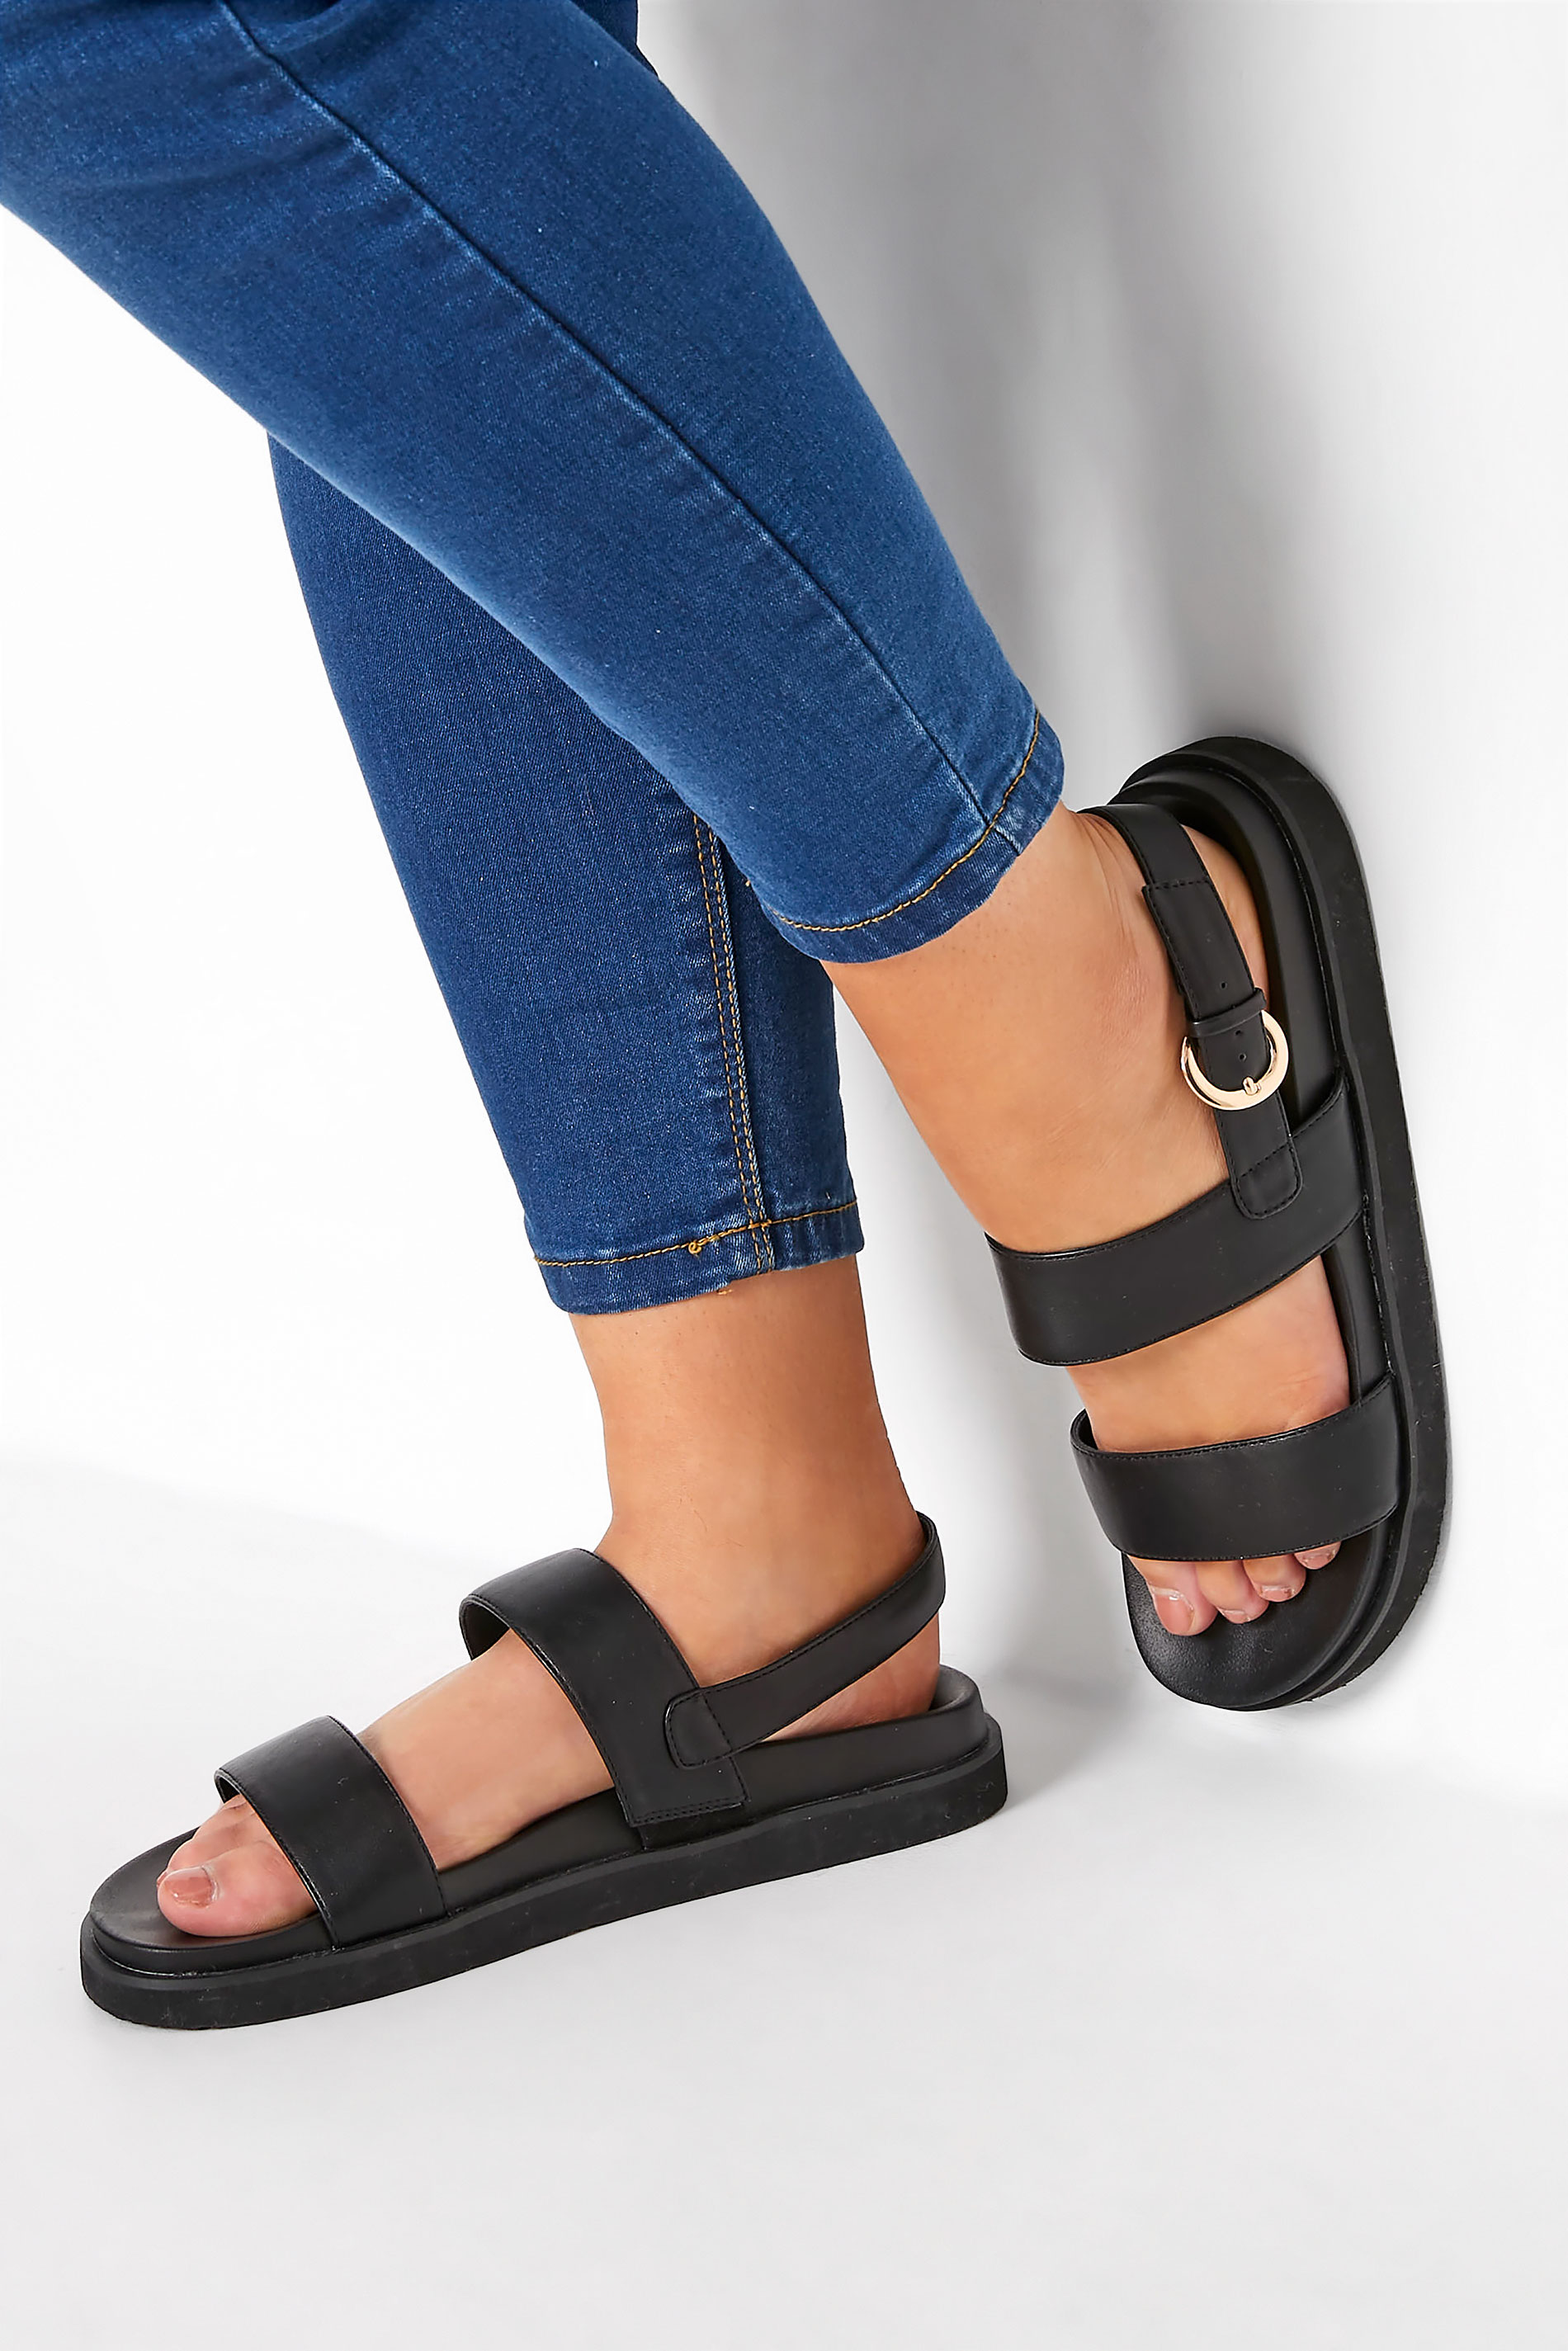 LIMITED COLLECTION Plus Size Black Double Strap Chunky Sandals In Extra Wide Fit | Yours Clothing 1